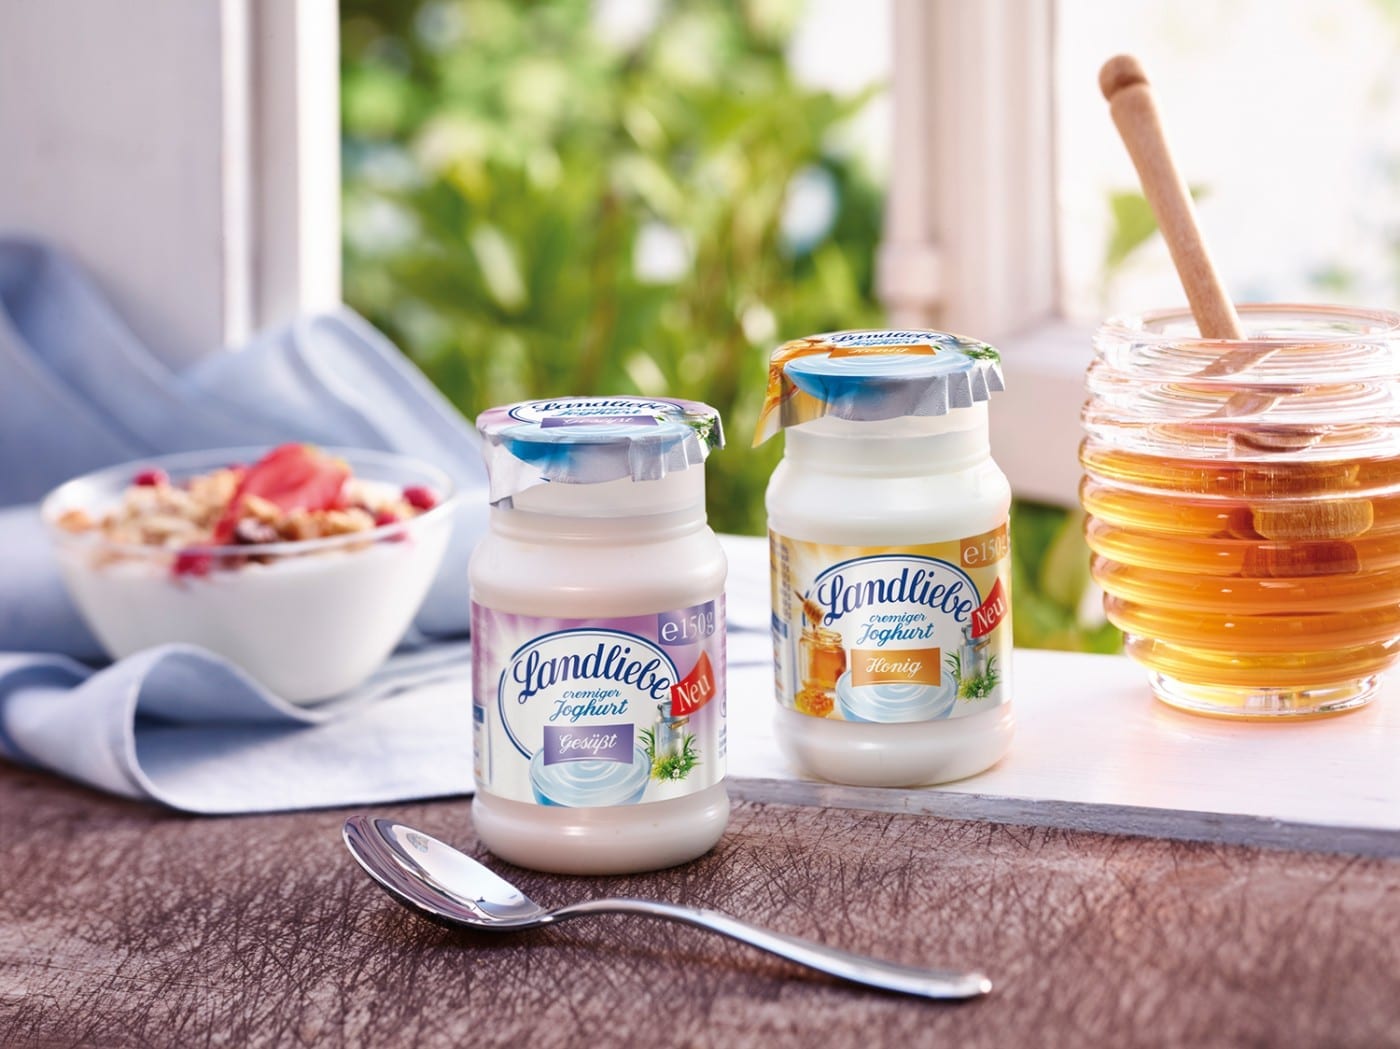 Landliebe and its milk finest yogurt for pudding, advertising rice